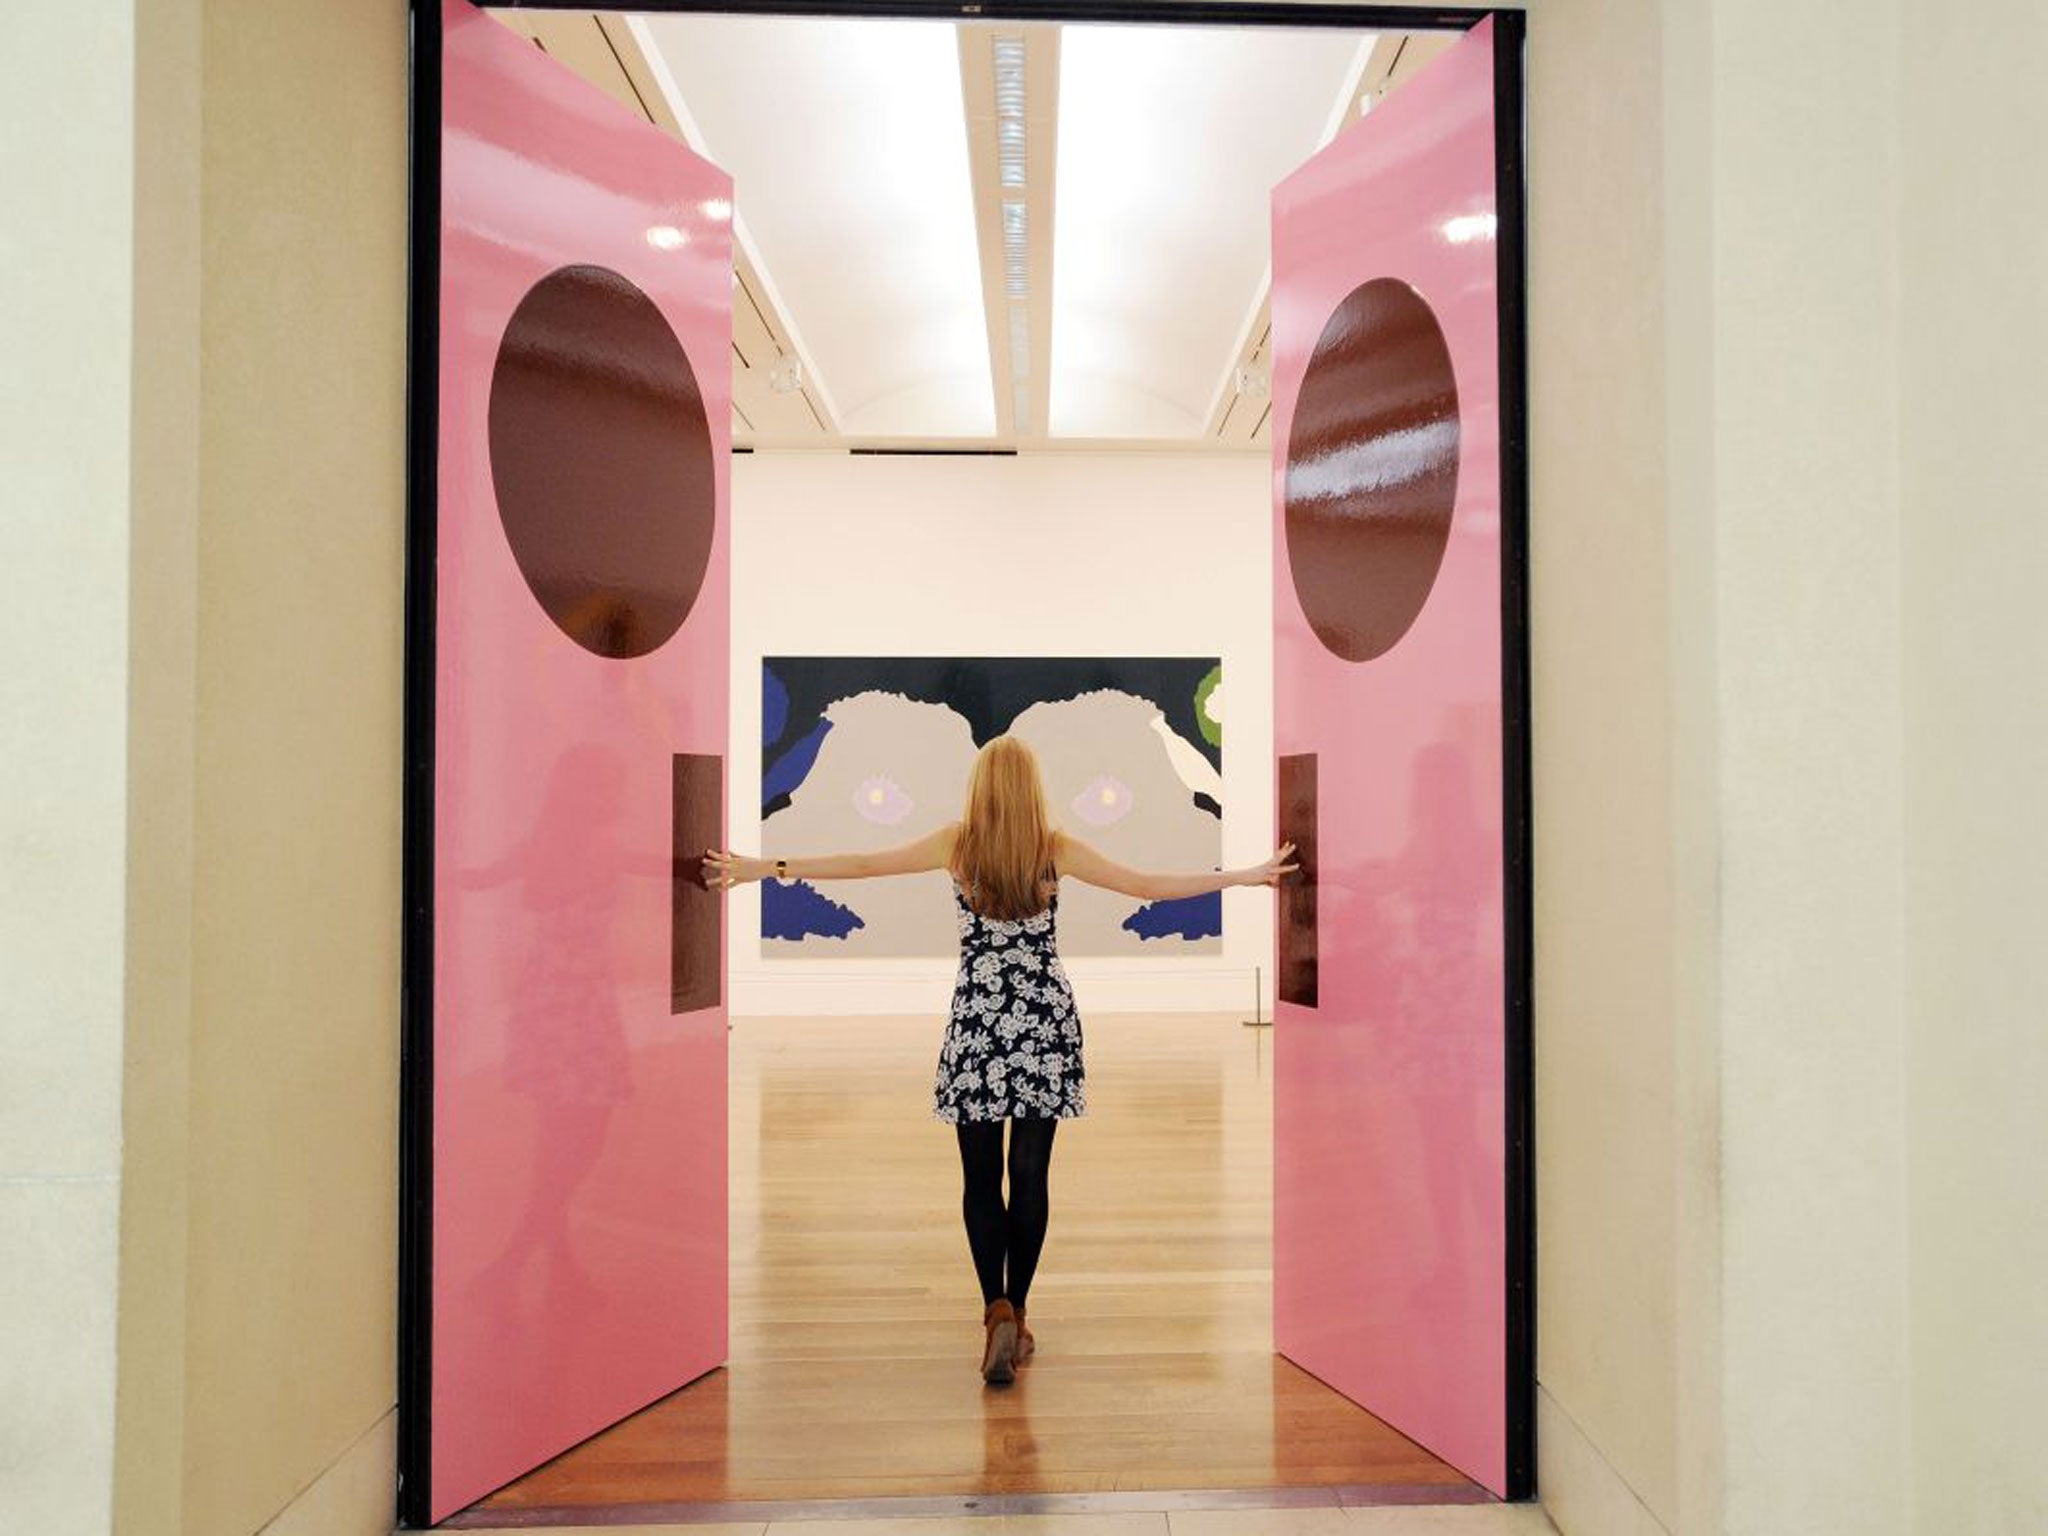 Gary Hume’s How to paint a door (2013)